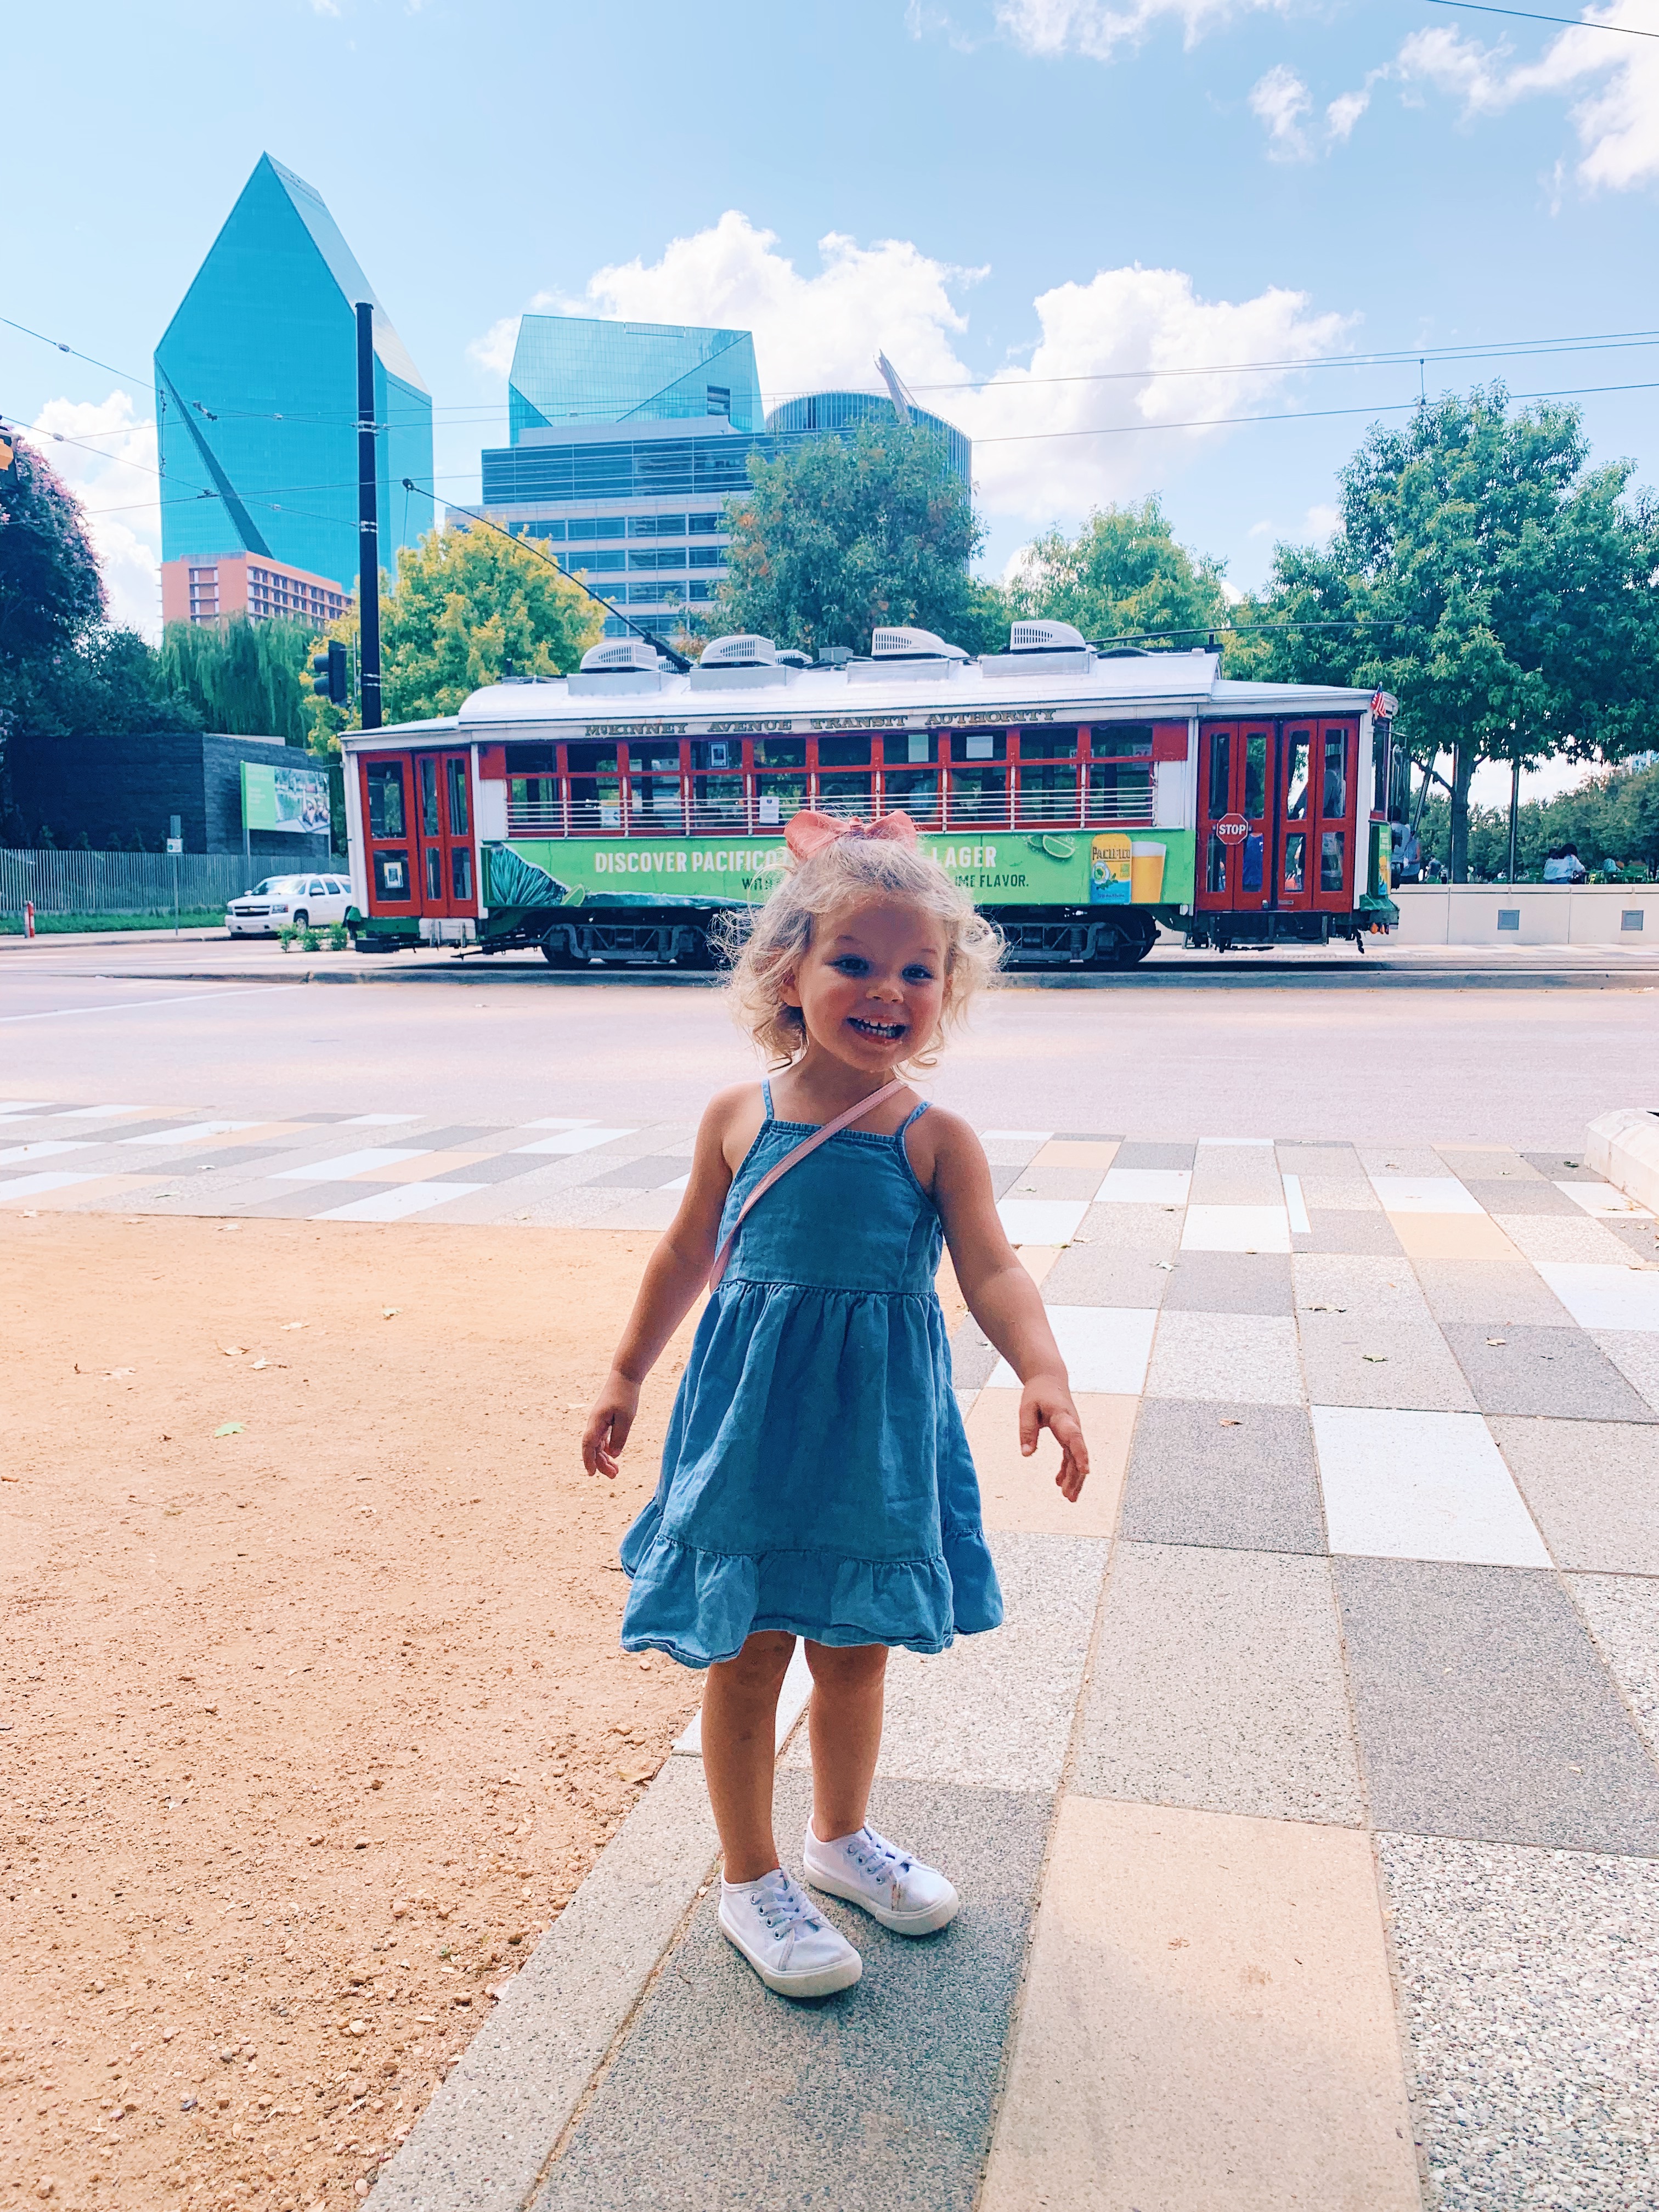 Riding the uptown dallas trolley with kids